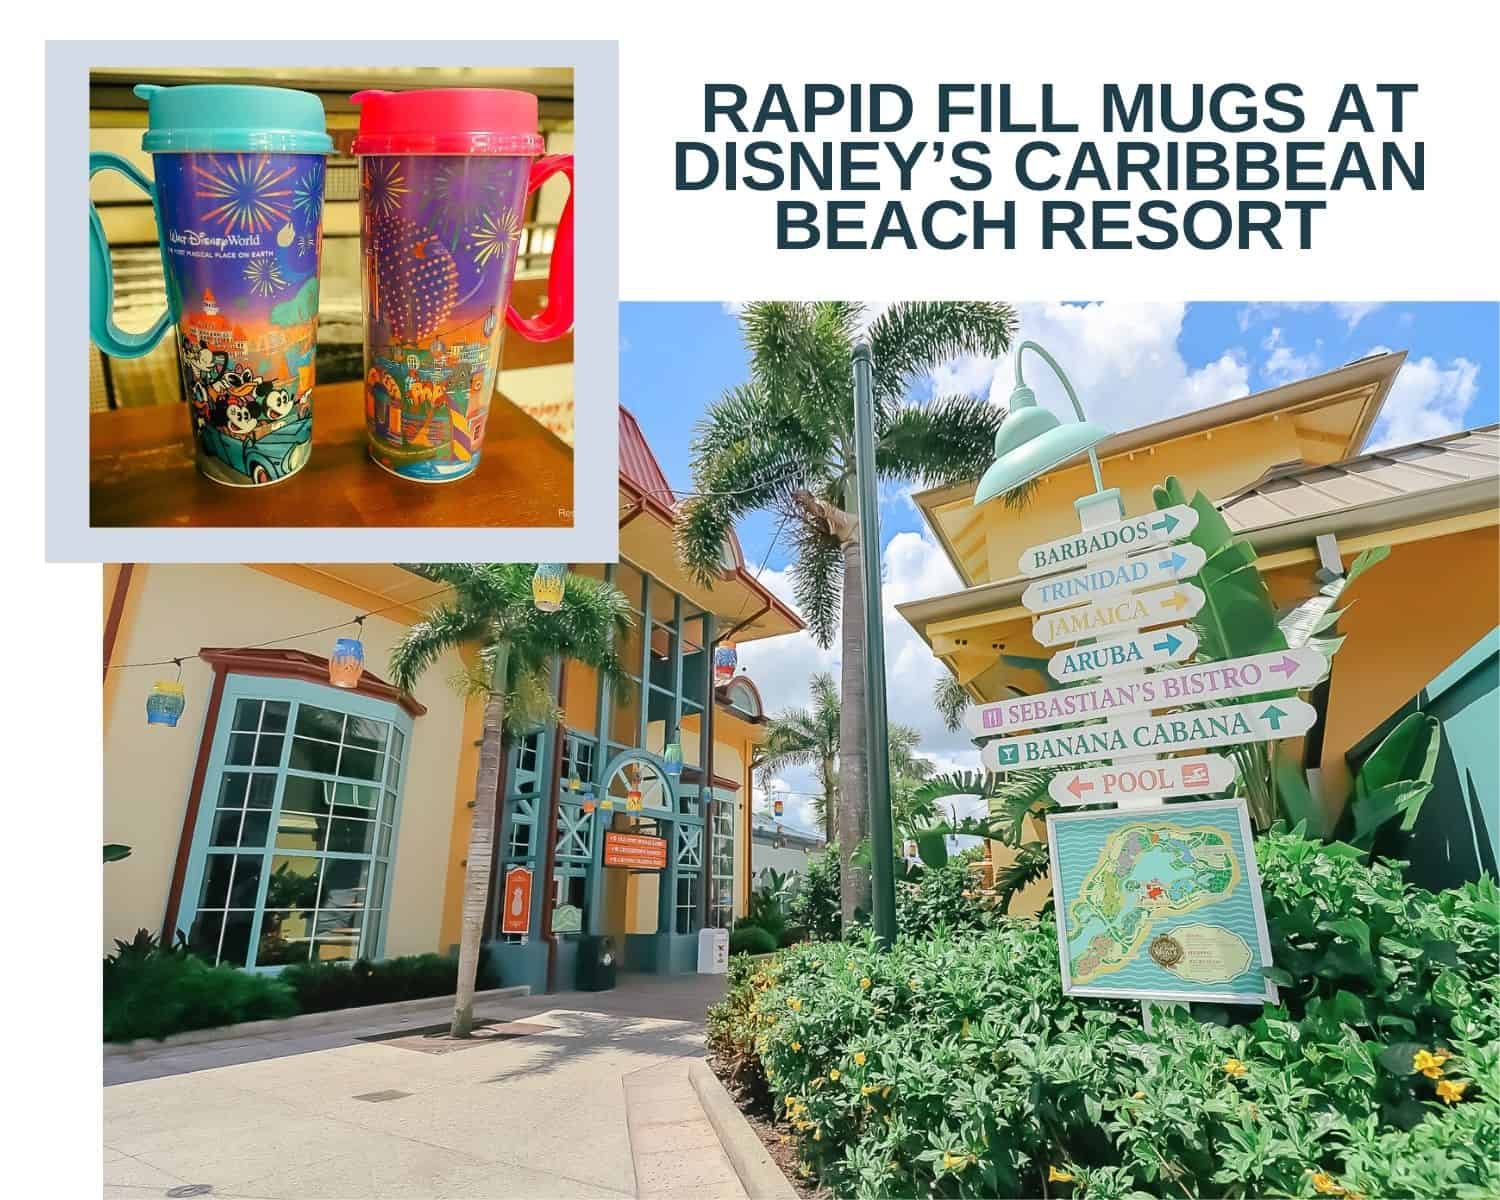 Everything Rapid Fill Mugs at Disney’s Caribbean Beach (With Locations and Beverages)